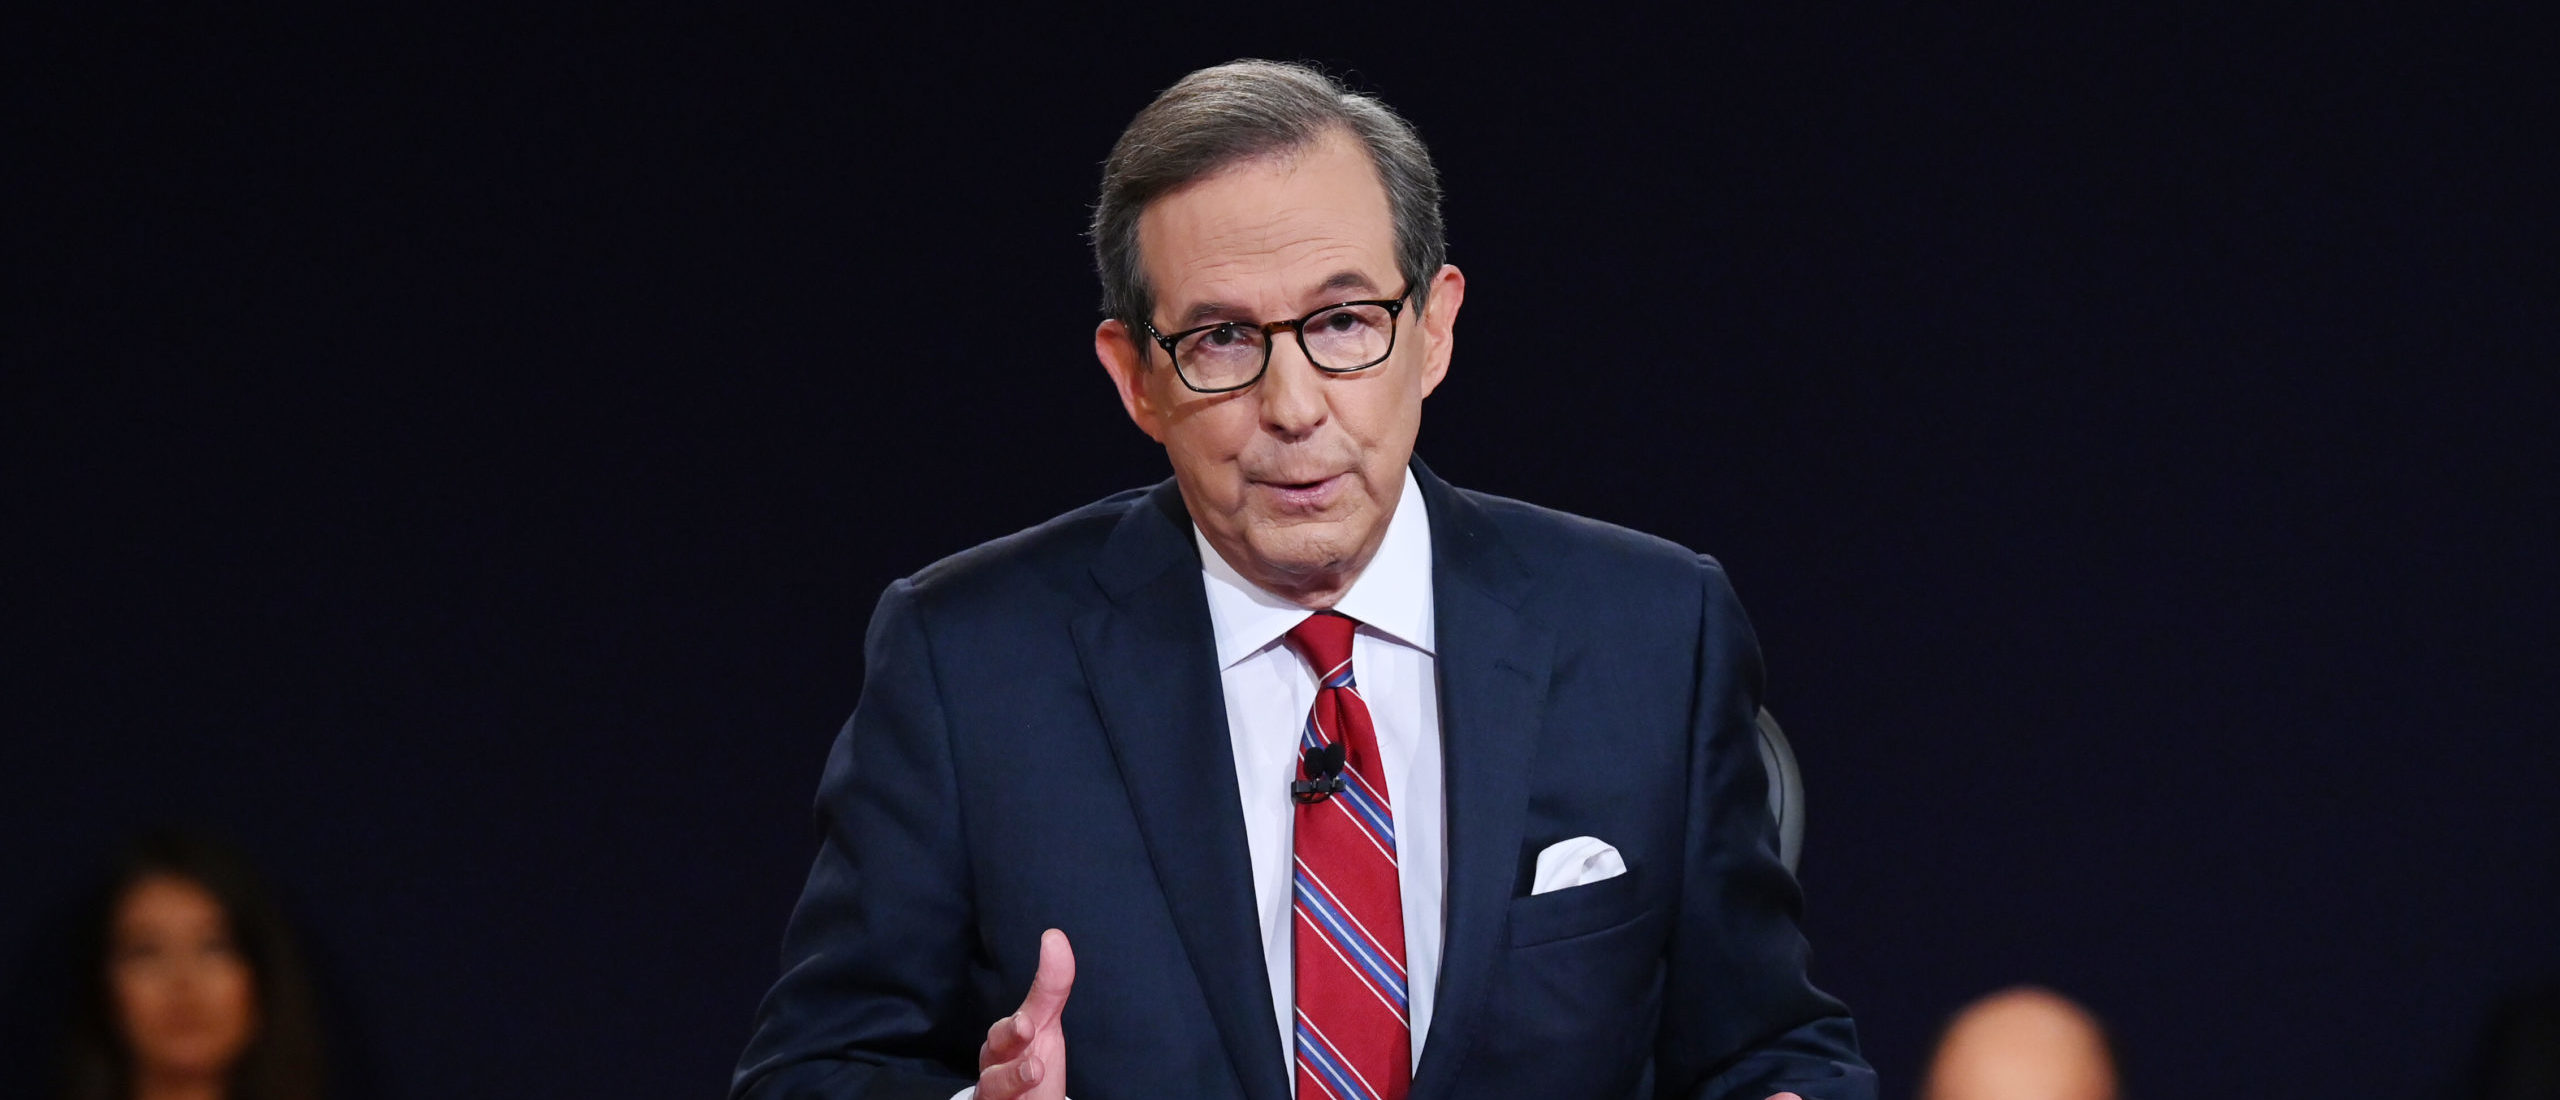 CLEVELAND, OHIO - SEPTEMBER 29: Debate moderator and Fox News anchor Chris Wallace directs the first presidential debate between U.S. President Donald Trump and Democratic presidential nominee Joe Biden at the Health Education Campus of Case Western Reserve University on September 29, 2020 in Cleveland, Ohio. This is the first of three planned debates between the two candidates in the lead up to the election on November 3. (Photo by Olivier Douliery-Pool/Getty Images)